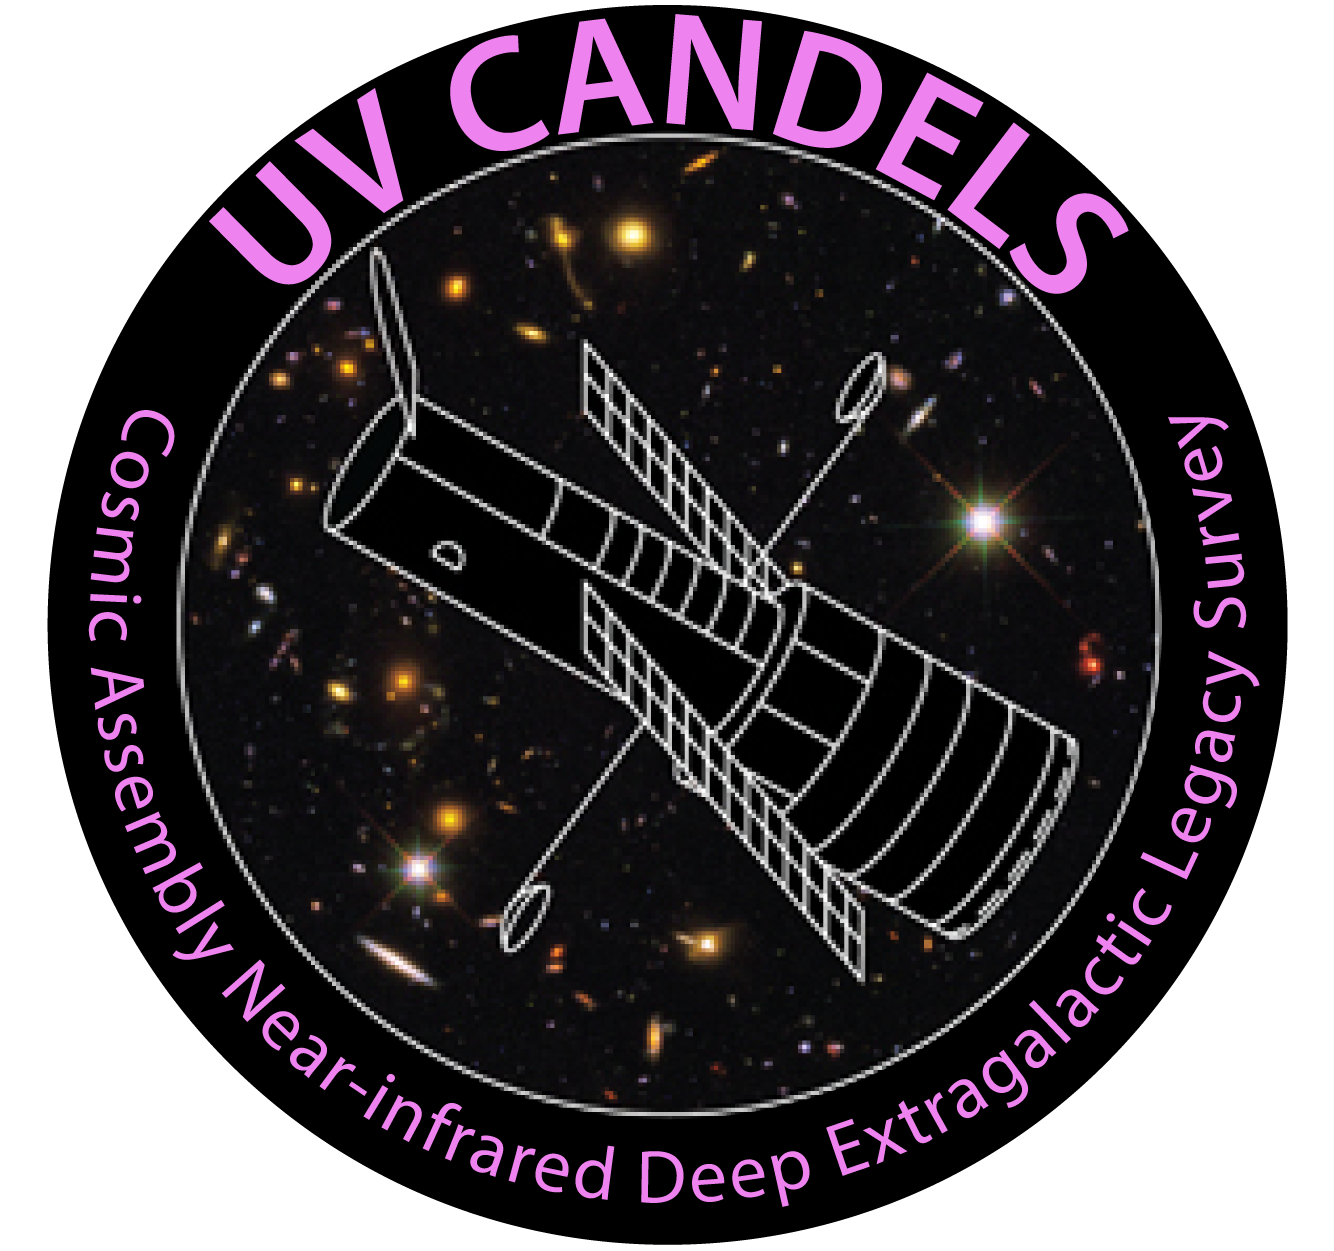 Circular logo for the UVCANDELS project: a field of galaxies on the sky with a white outline of the Hubble telescope on top.